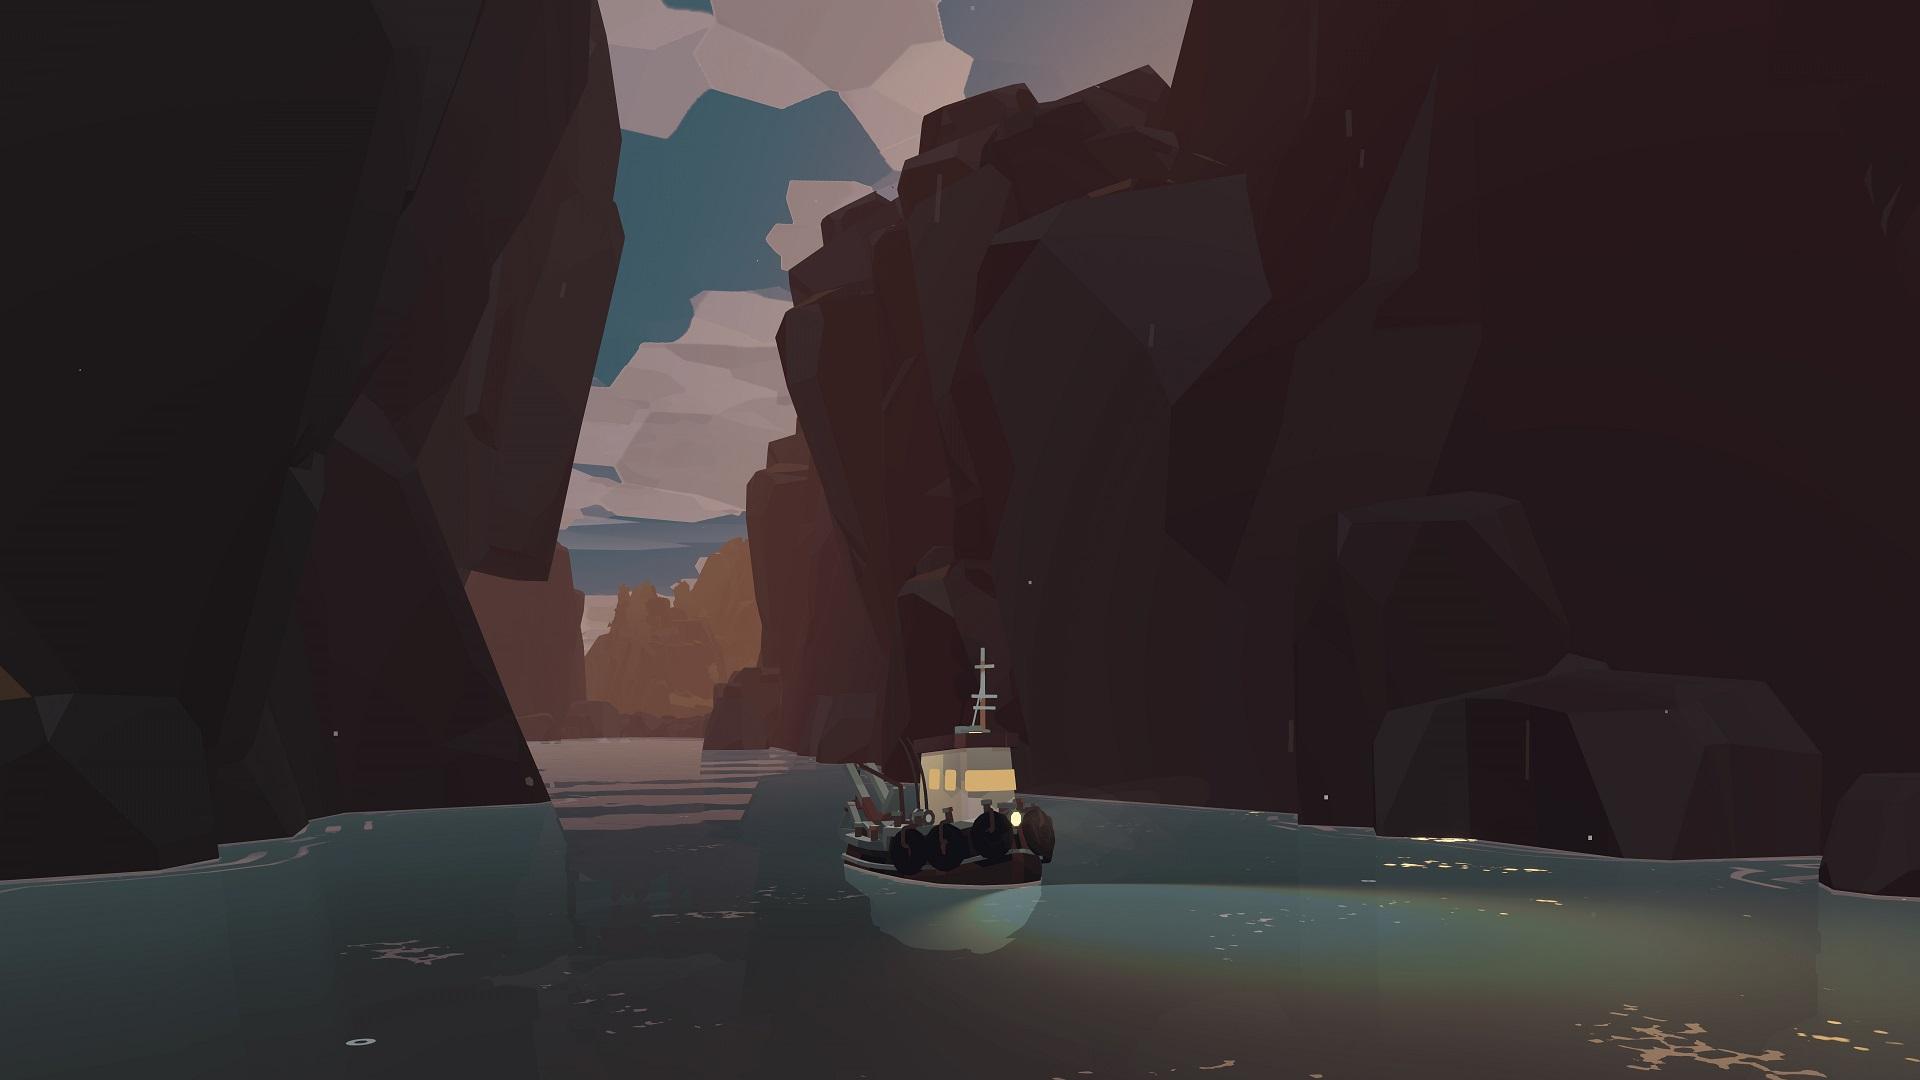 'Dredge' Boat with headlights sailing through a tight path of big rock formations.